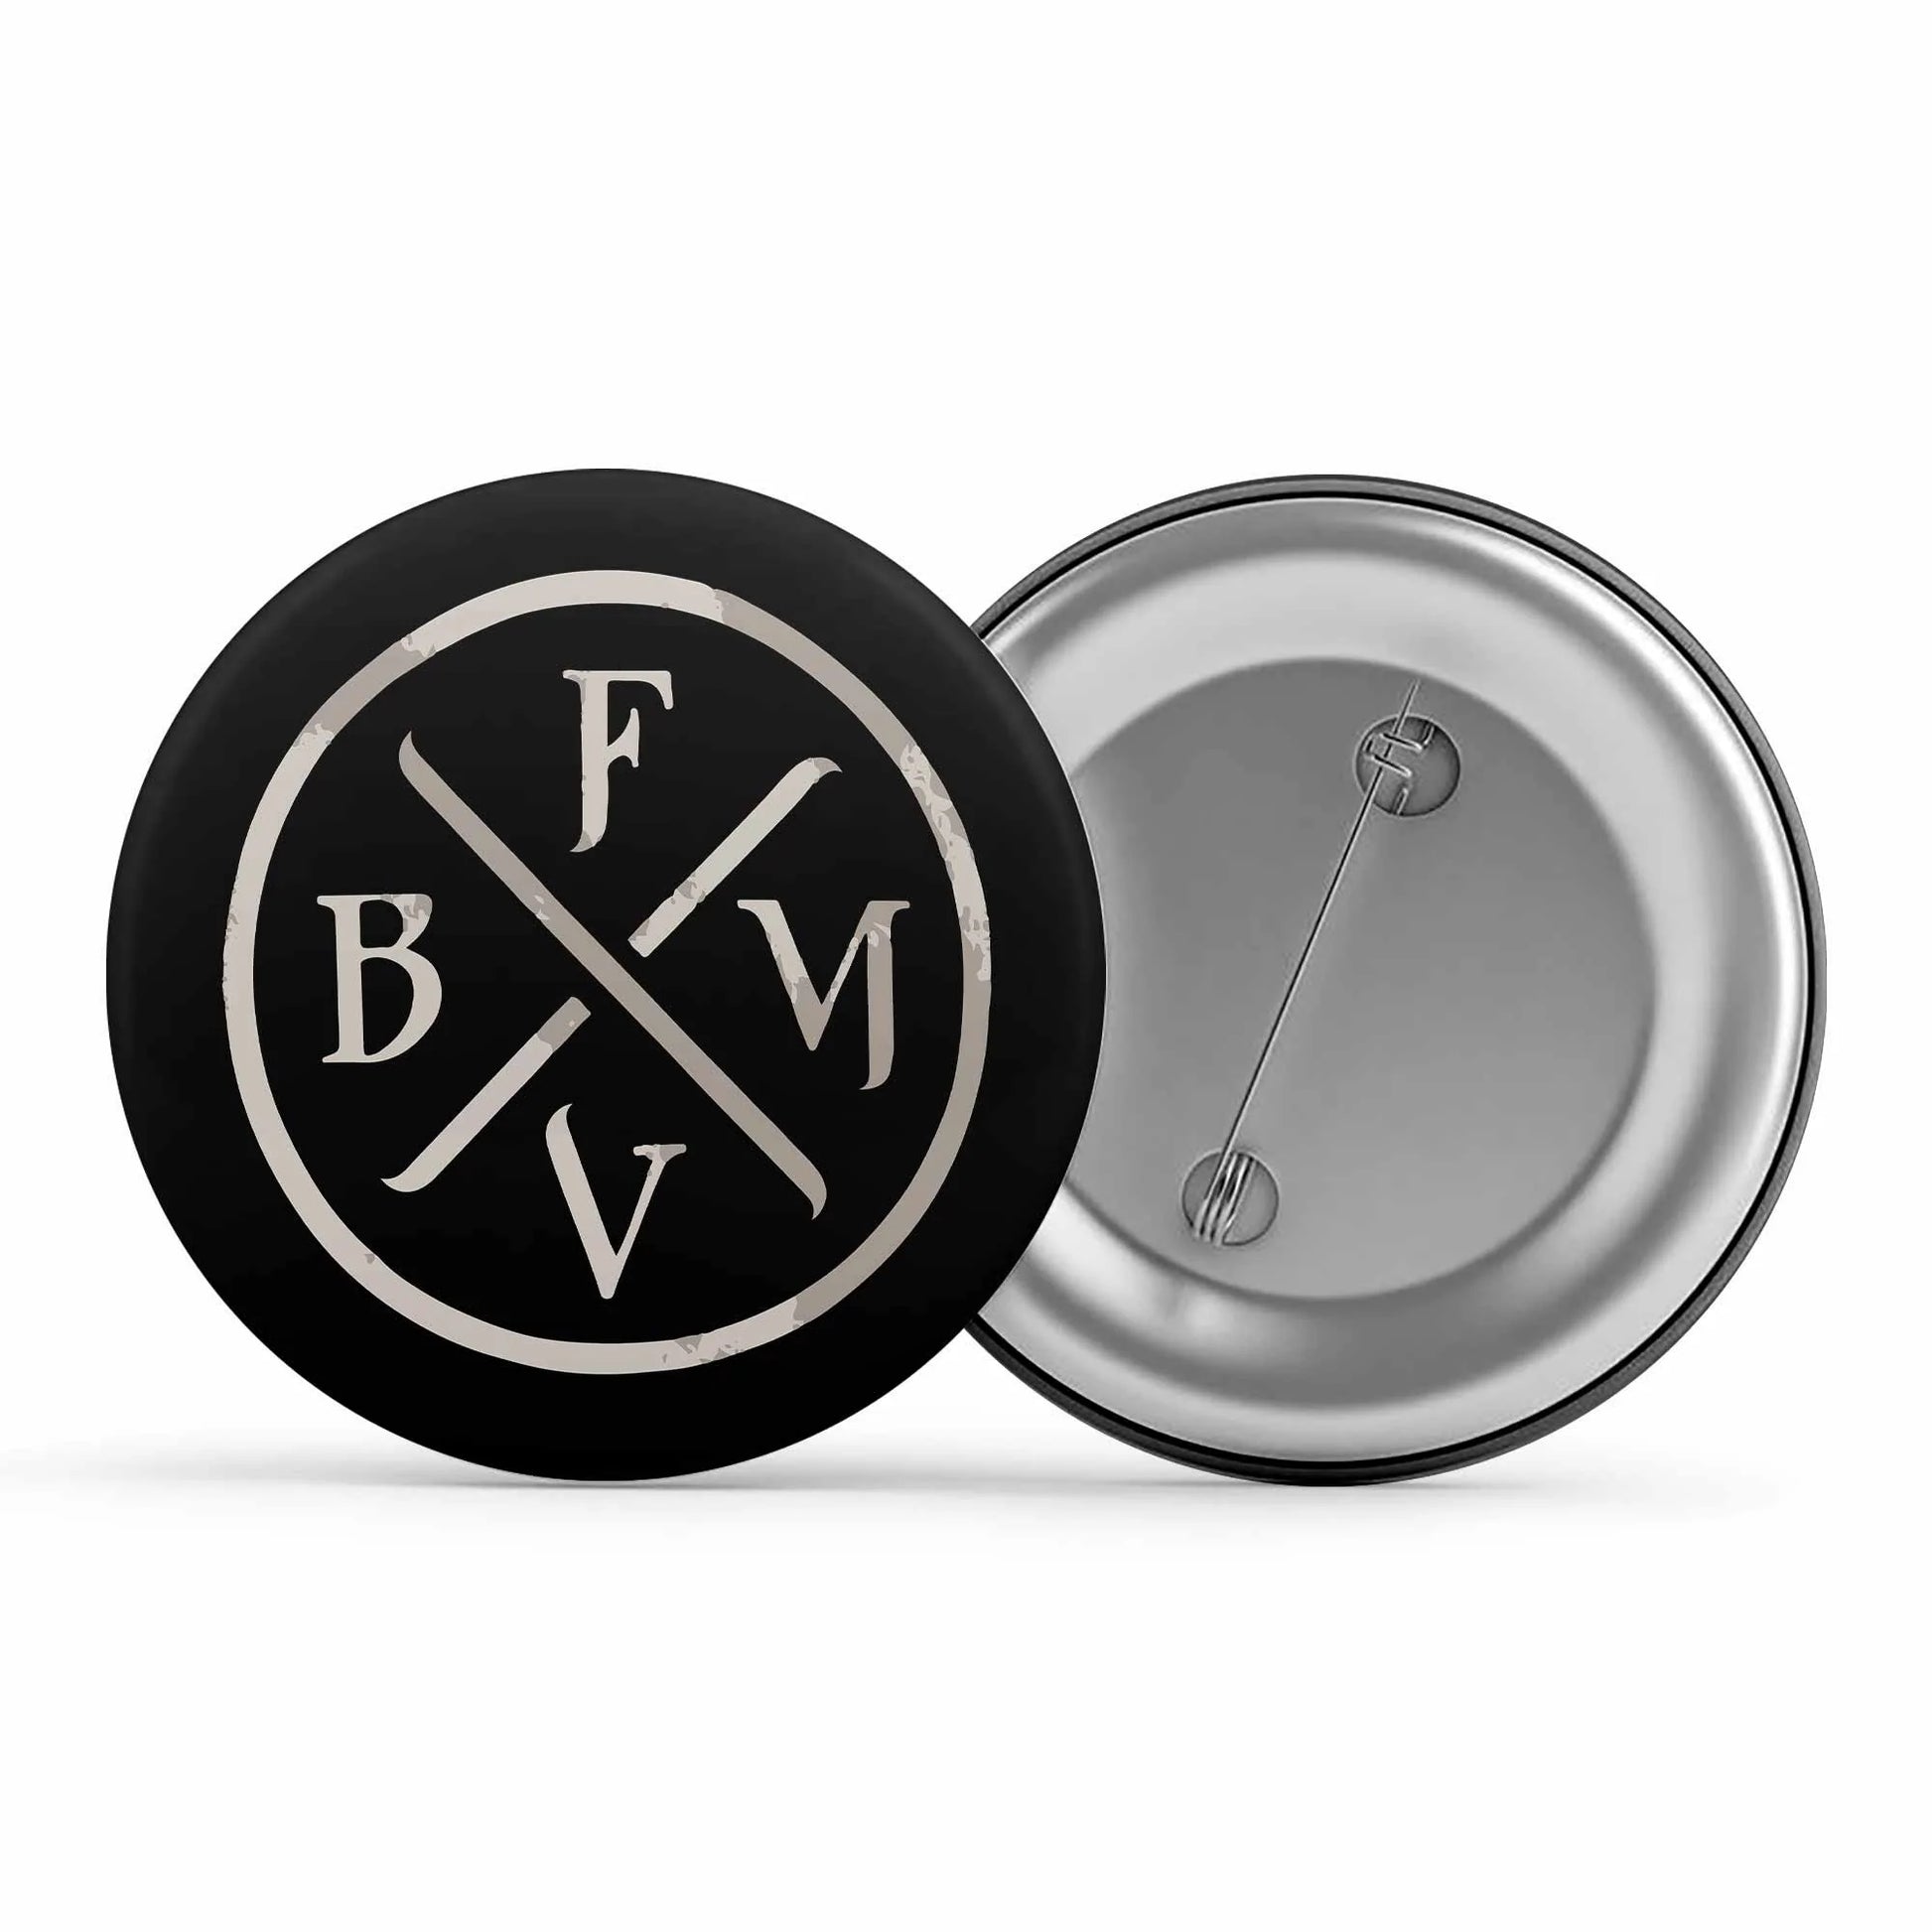 bullet for my valentine bfmv badge pin button music band buy online india the banyan tee tbt men women girls boys unisex